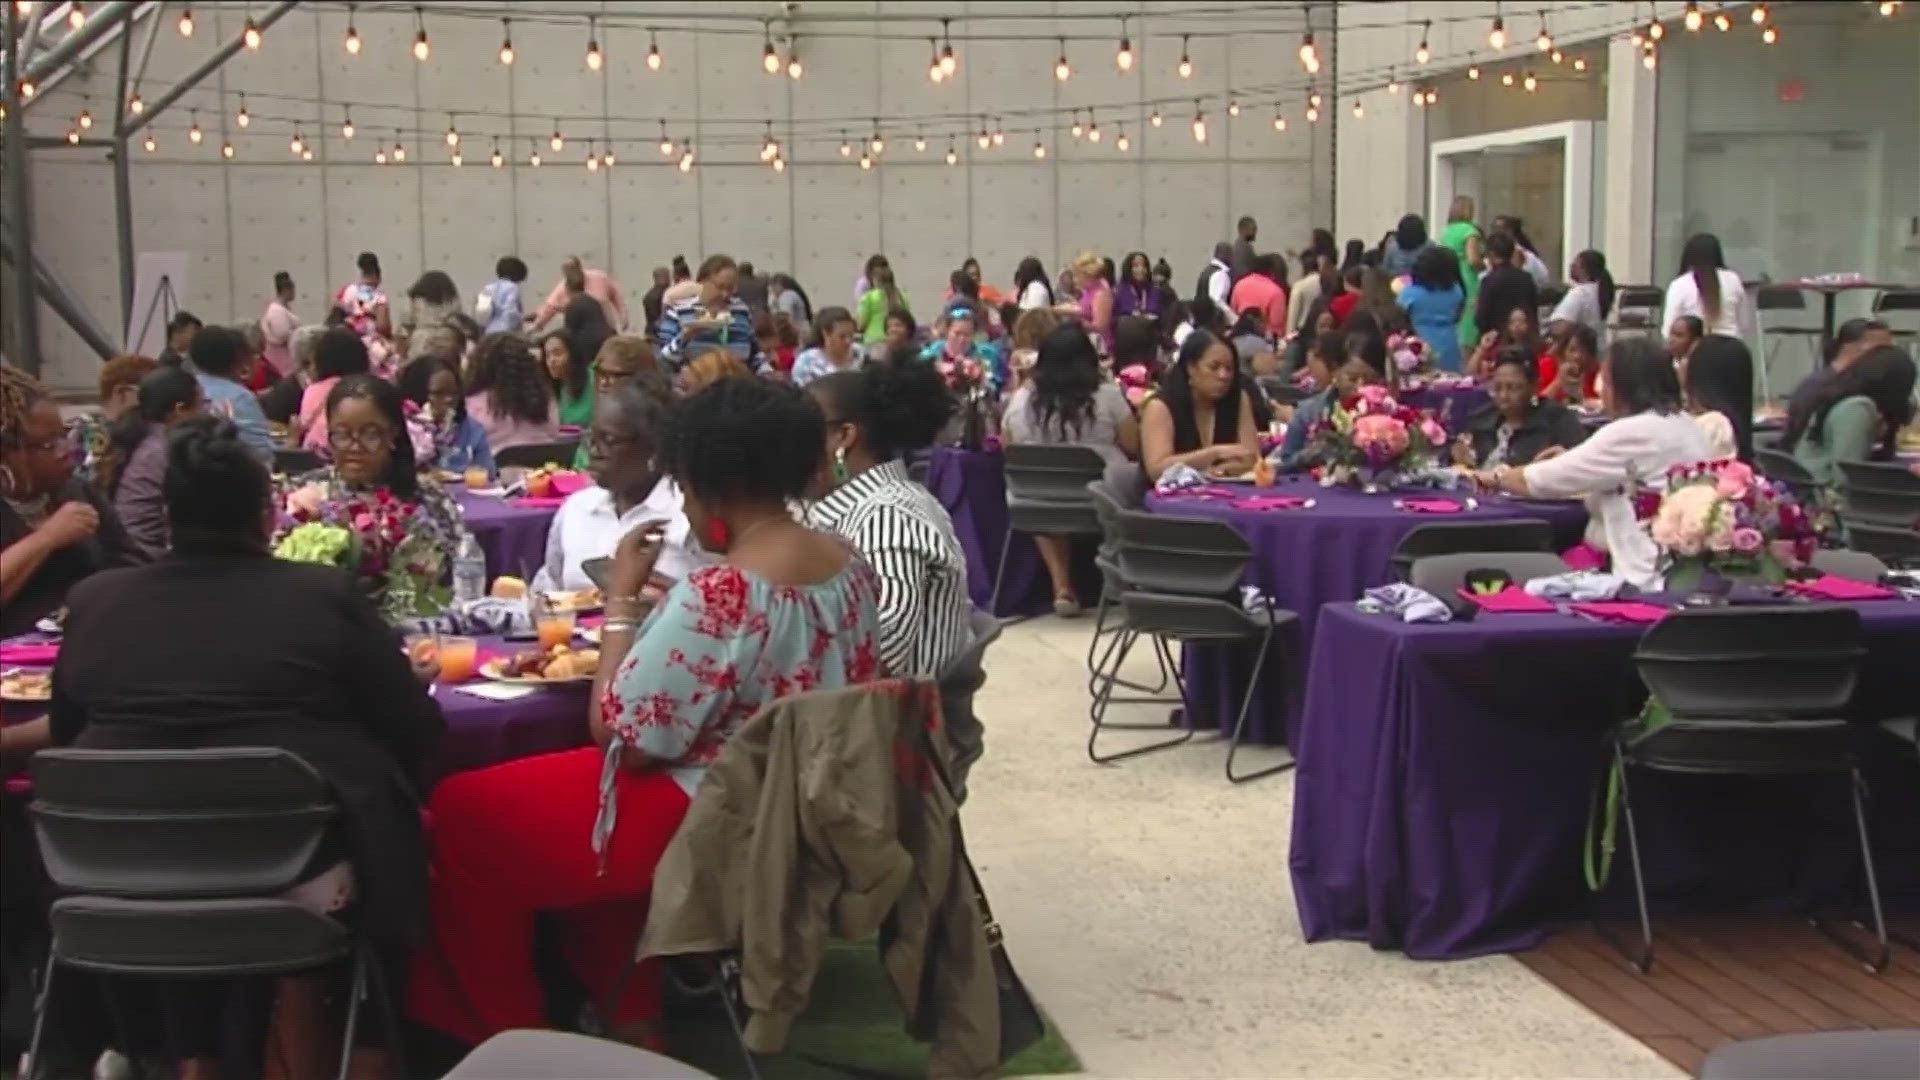 The 2nd annual Working Mother’s Brunch honored Shelby County Government’s “moms, grandmothers, and mother-like figures.”